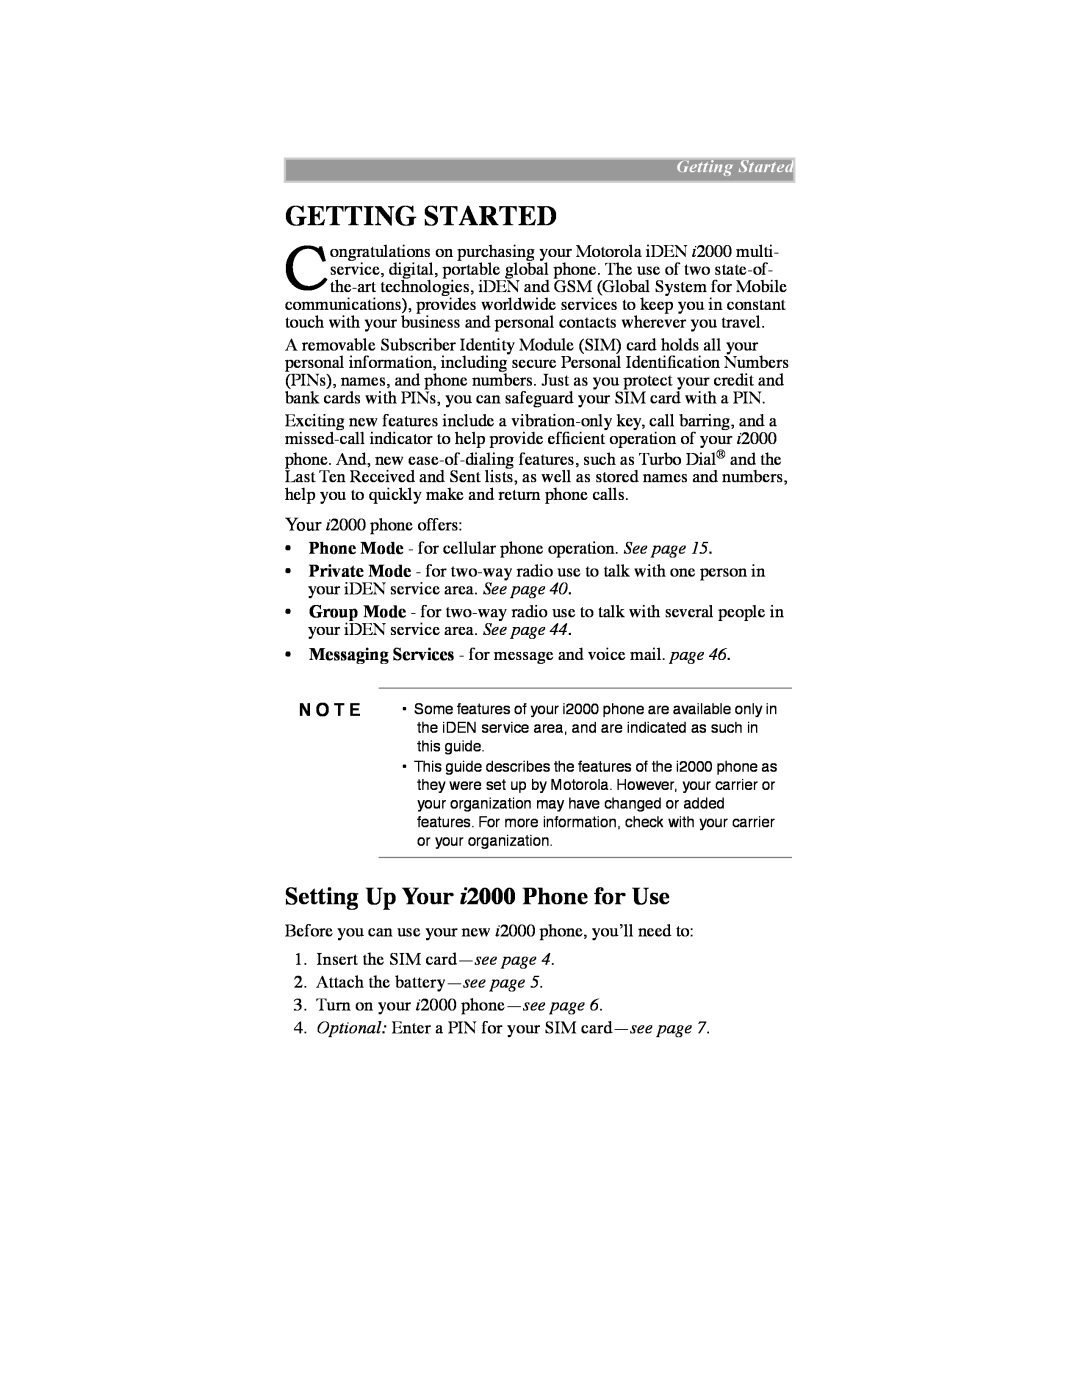 Motorola iDEN manual Getting Started, Setting Up Your i2000 Phone for Use, N O T E 